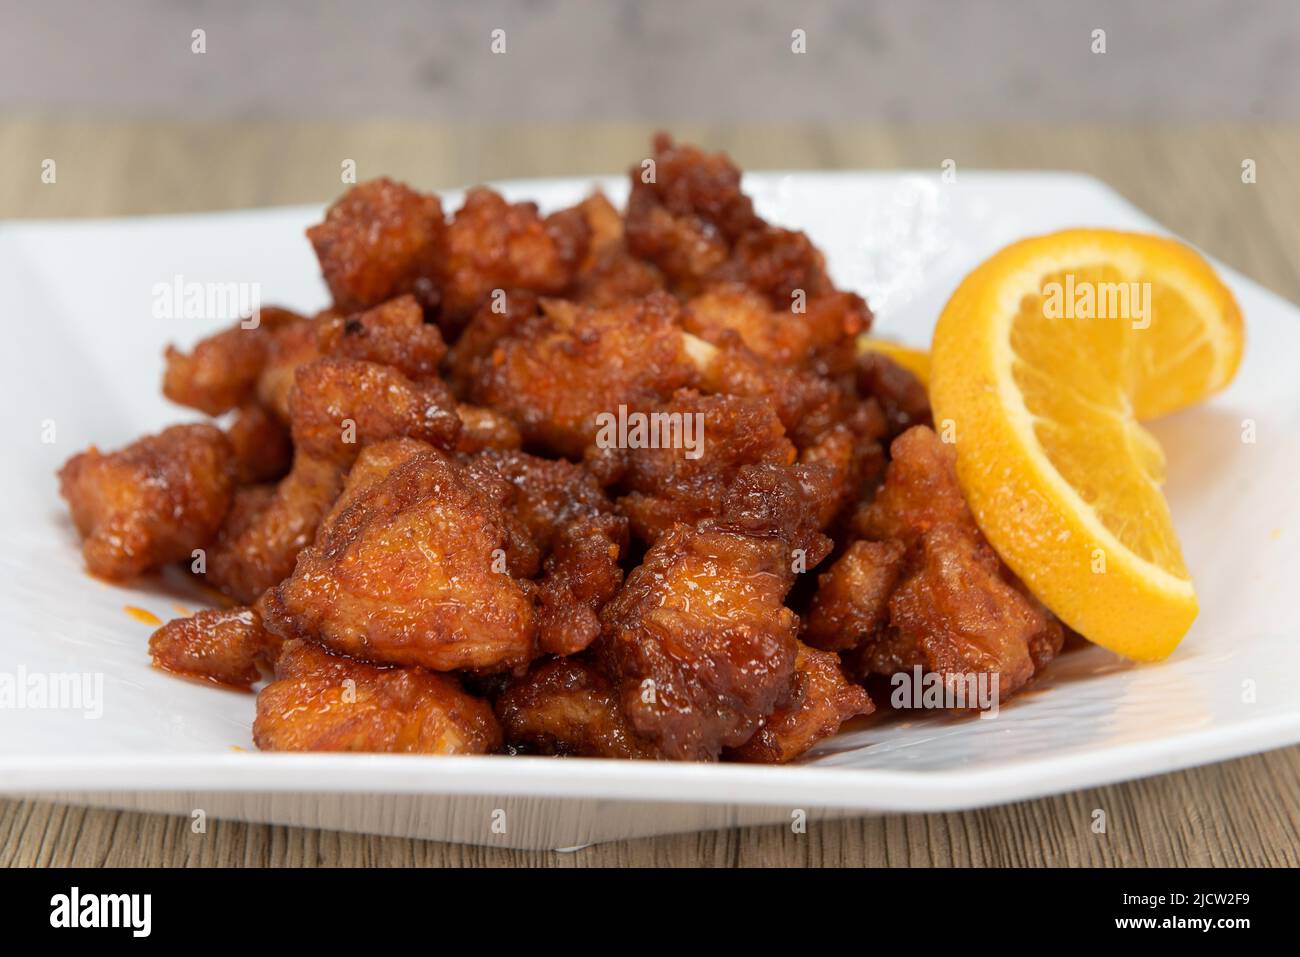 Tangy orange chicken piled high with crispy crunchy pieces and ready to eat. Stock Photo